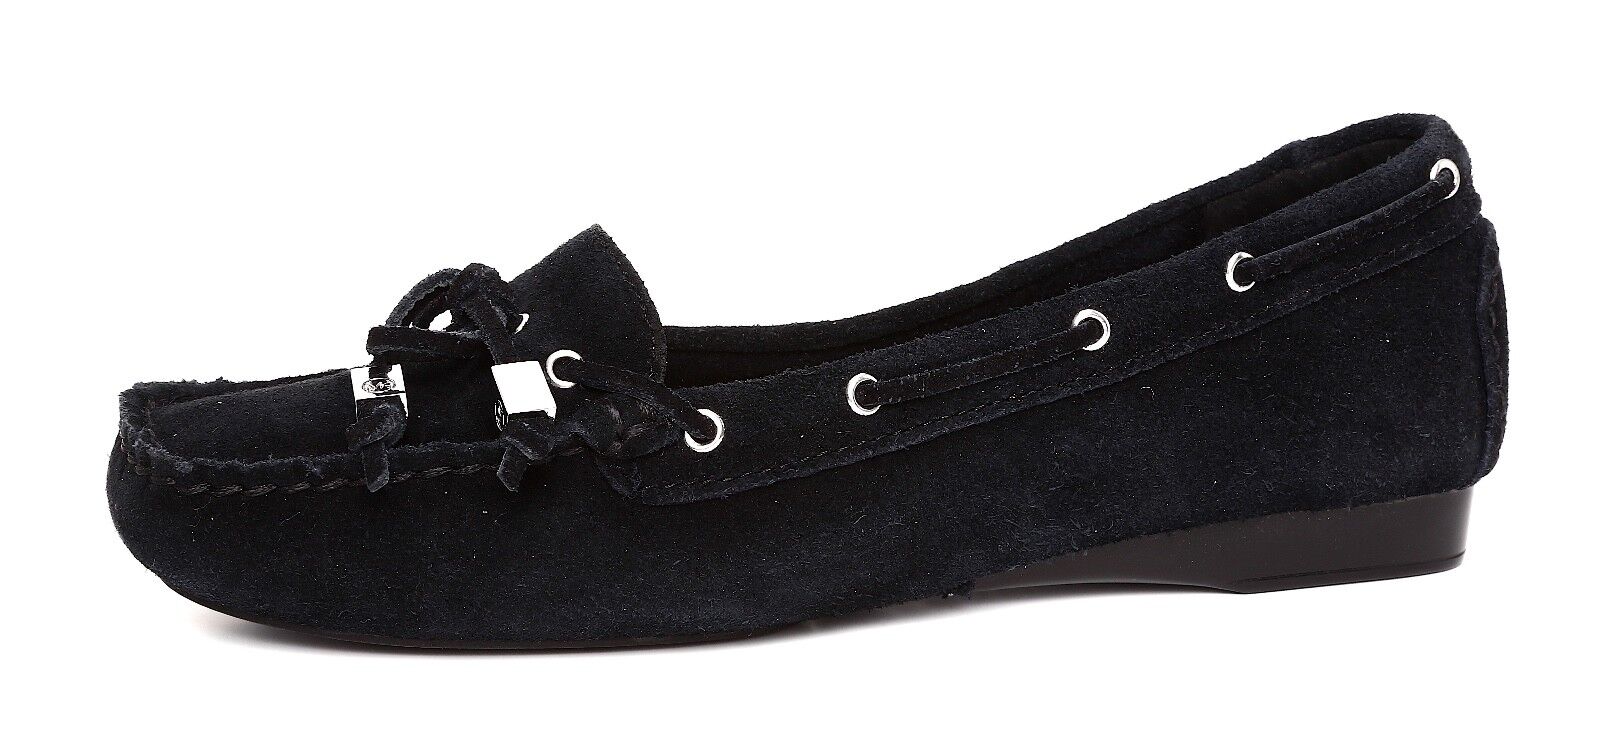 Michael Kors Womenapos;s Popular products Black Suede Slip 4994 5M On Shoes Price reduction Sz